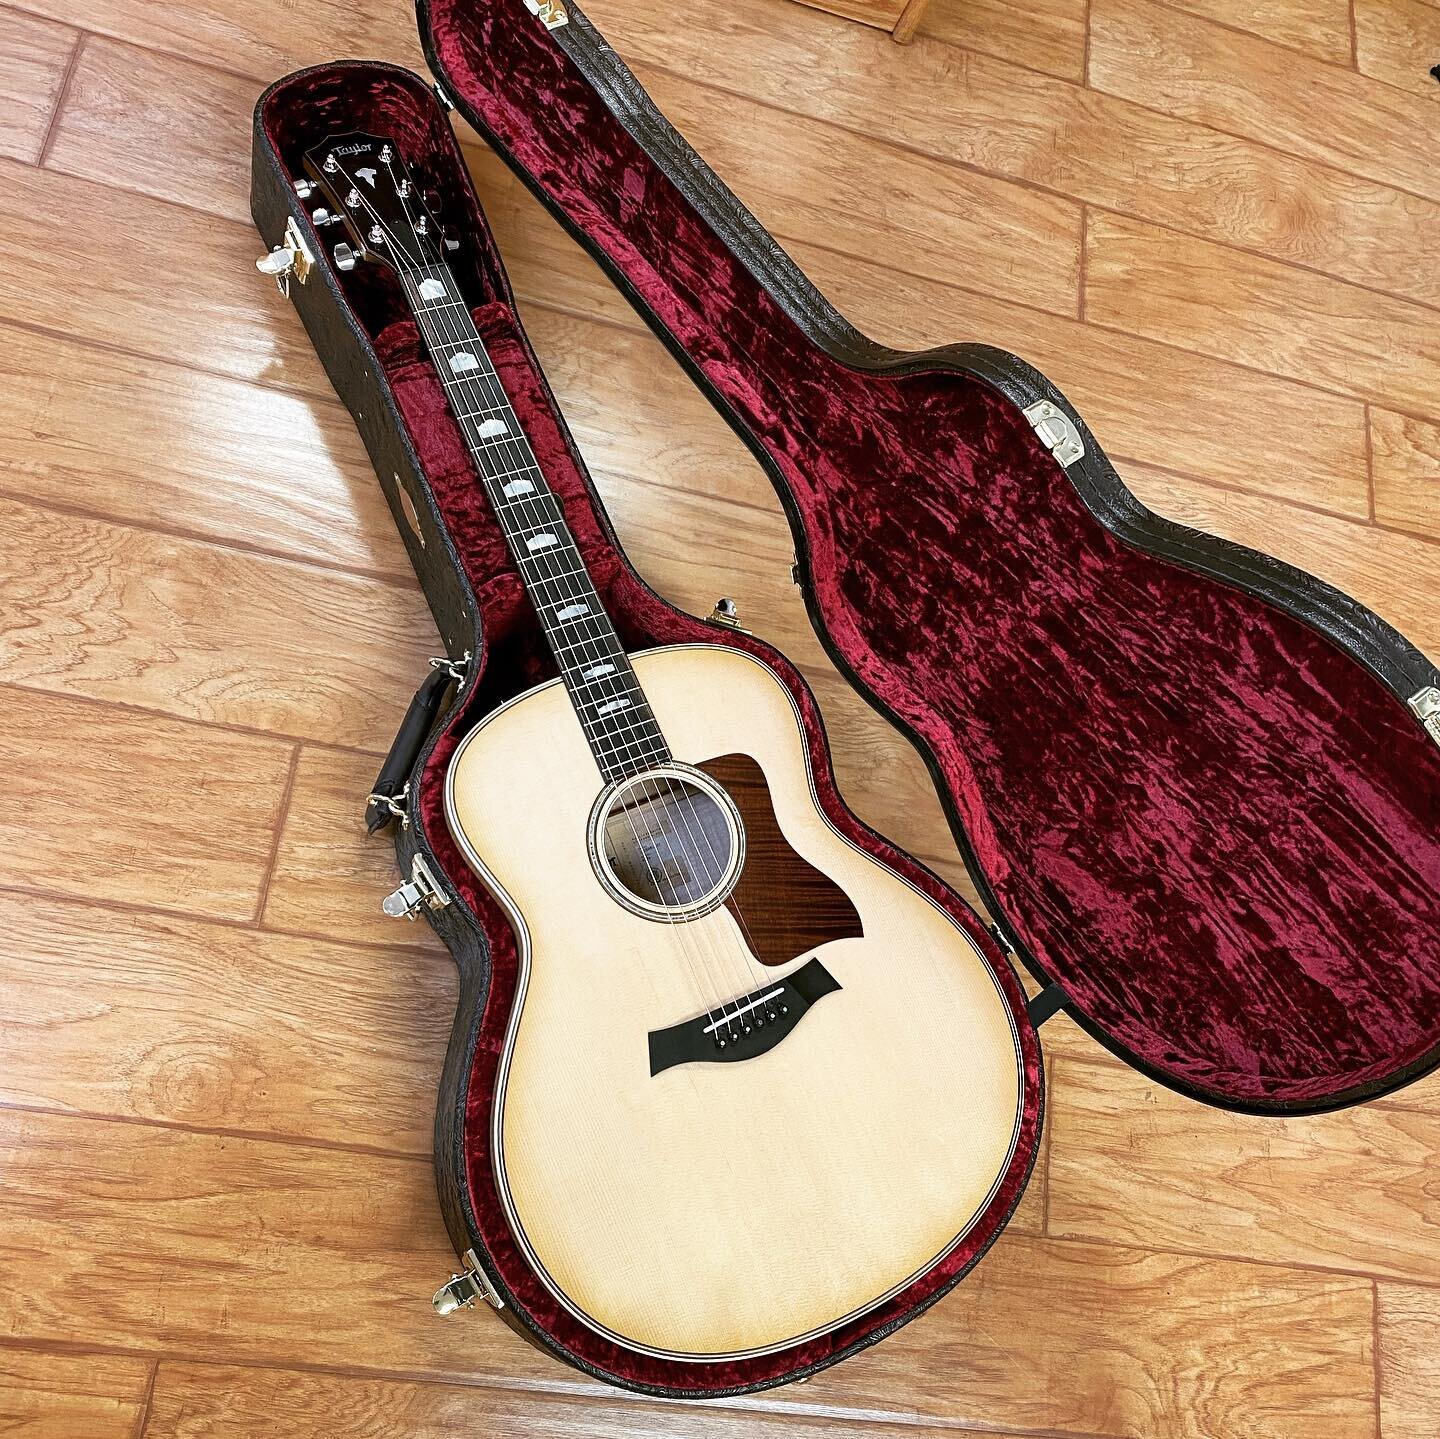 WOW! Look at all the crazy figuring on this @taylorguitars 618e guitar. A Sitka spruce top paired with maple back and sides and a big Grand Orchestra body gives you all the Ooomfph you need to be heard. 

Come check this and the rest of our large sel